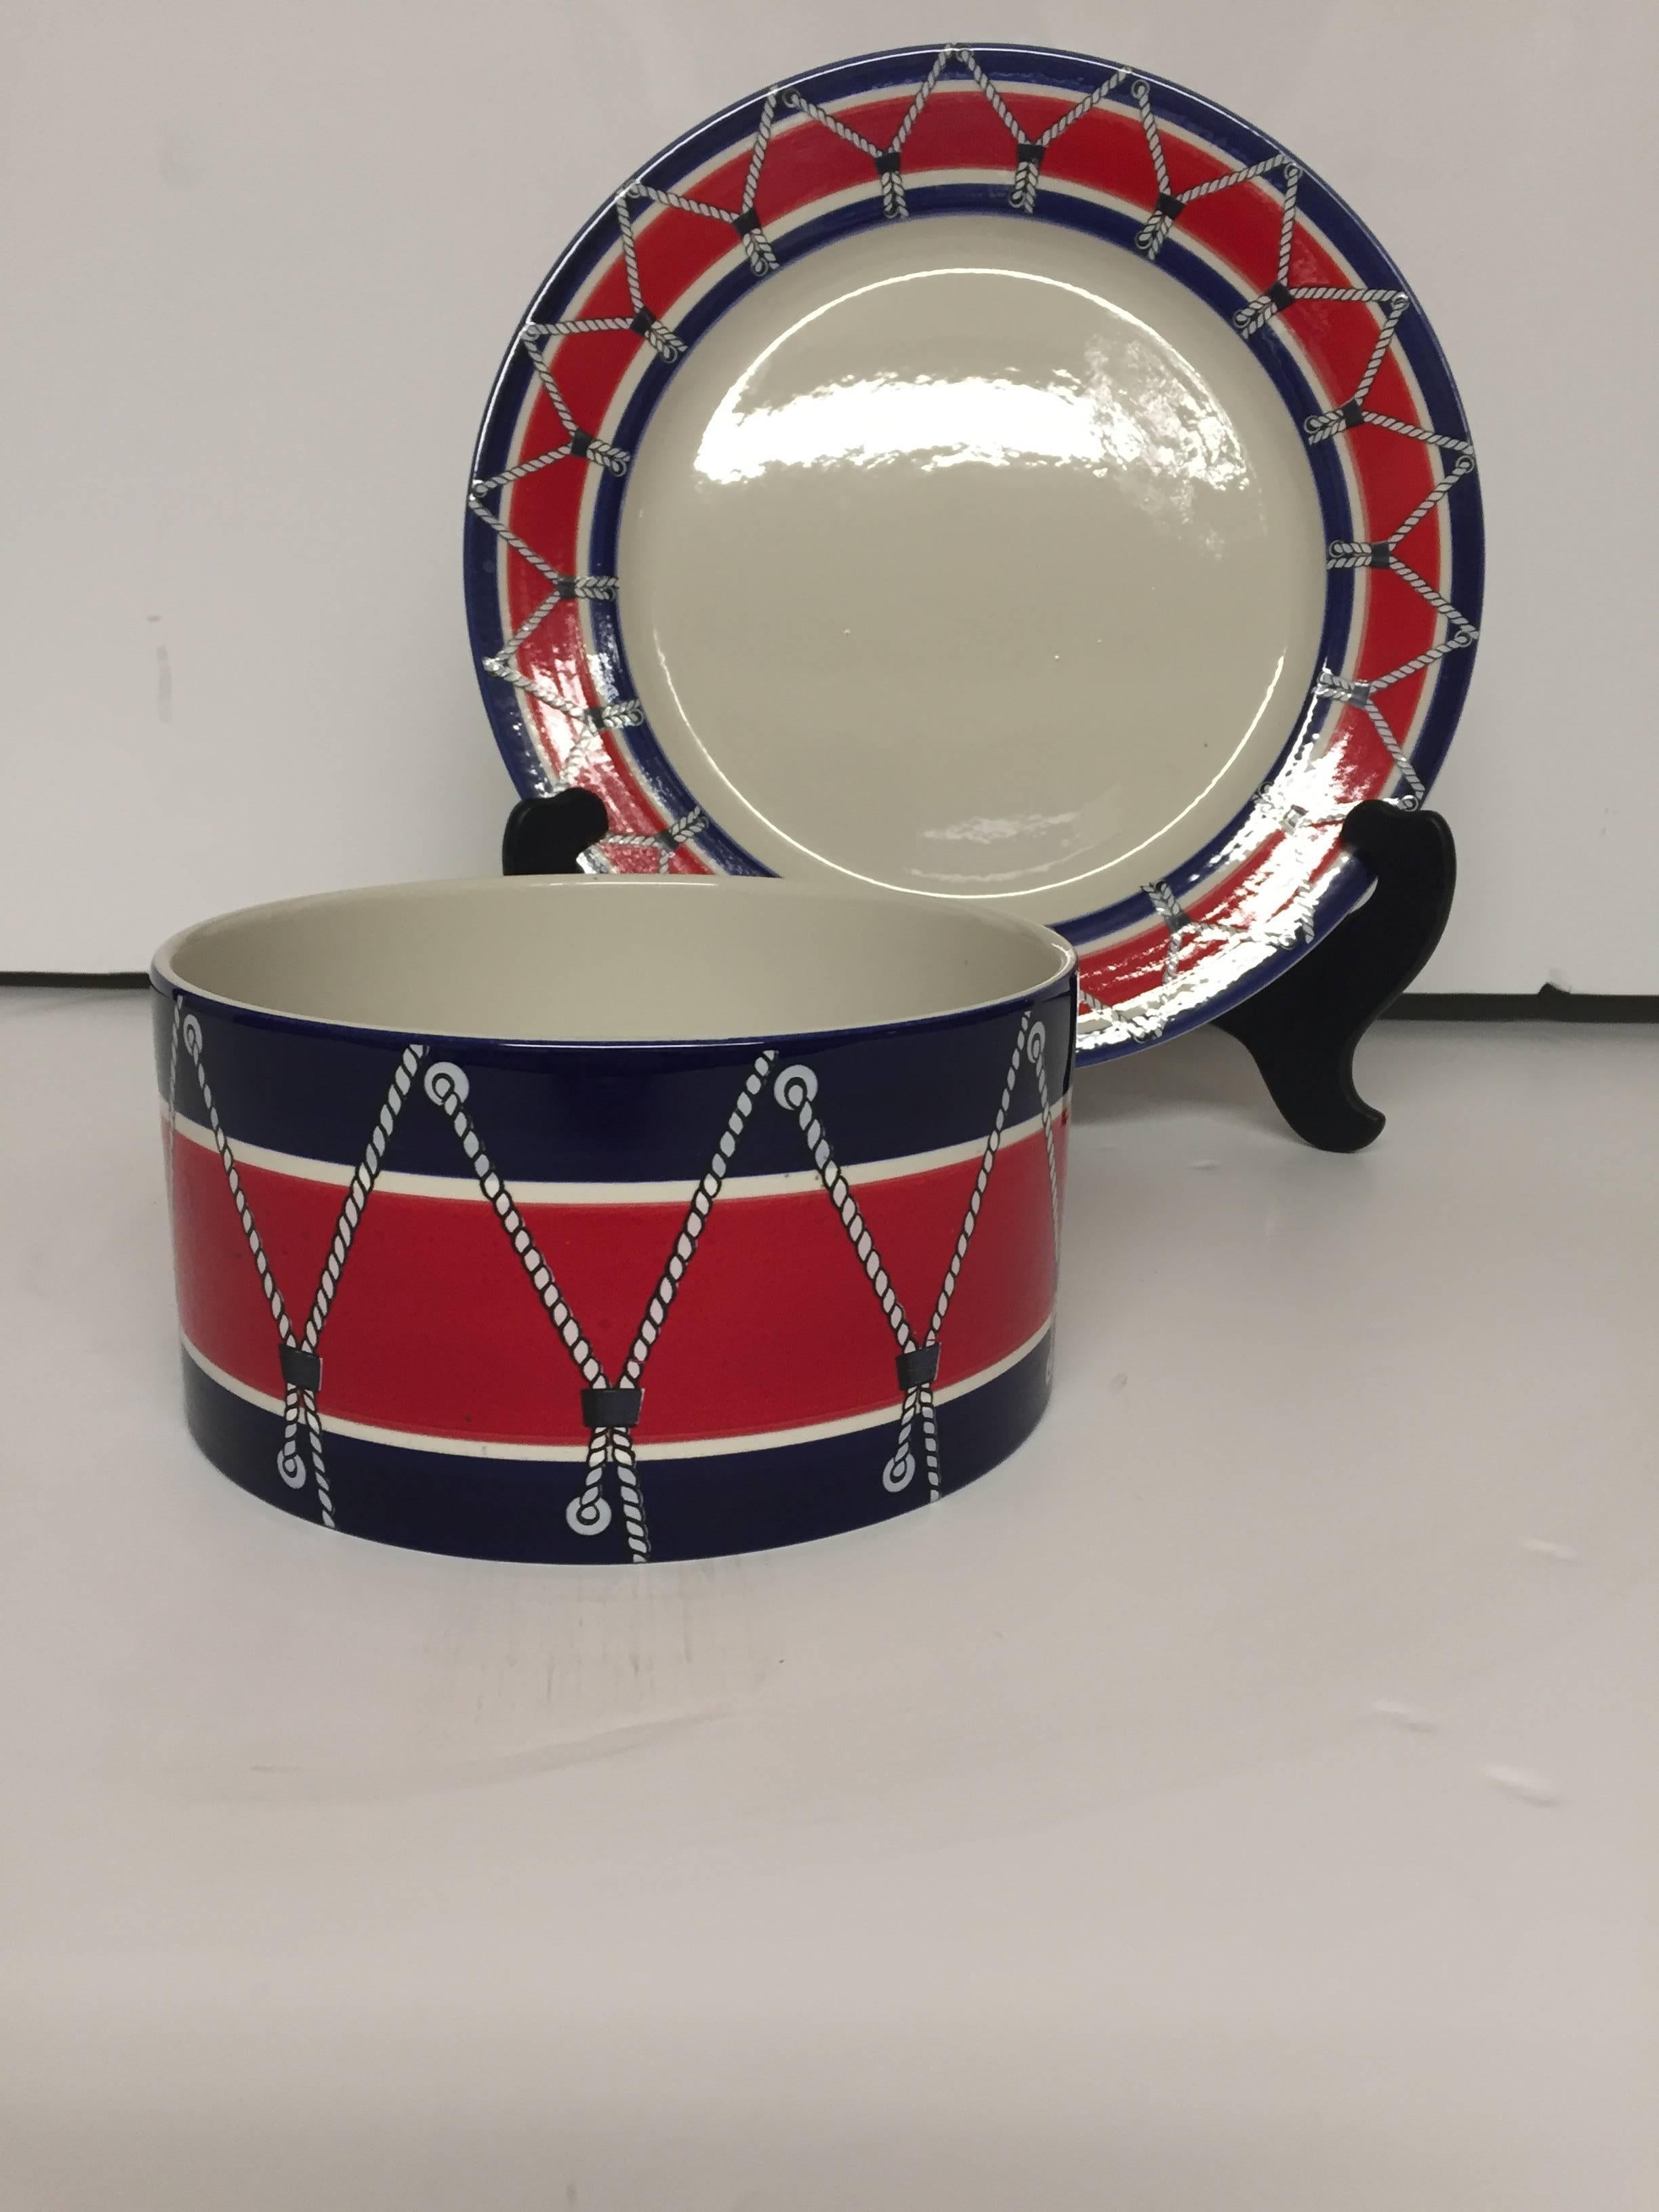 Fabulous and stylish set of Italian Mid-Century drum pattern dinnerware by Mancioli. Includes the following:
Six bowls 4.75 round x 2.5 H.
Six cups and saucers 2.75 H x 3.75 round.
(Saucers 6.5 round)
Six lunch plates 8.25. 
Bread and butter